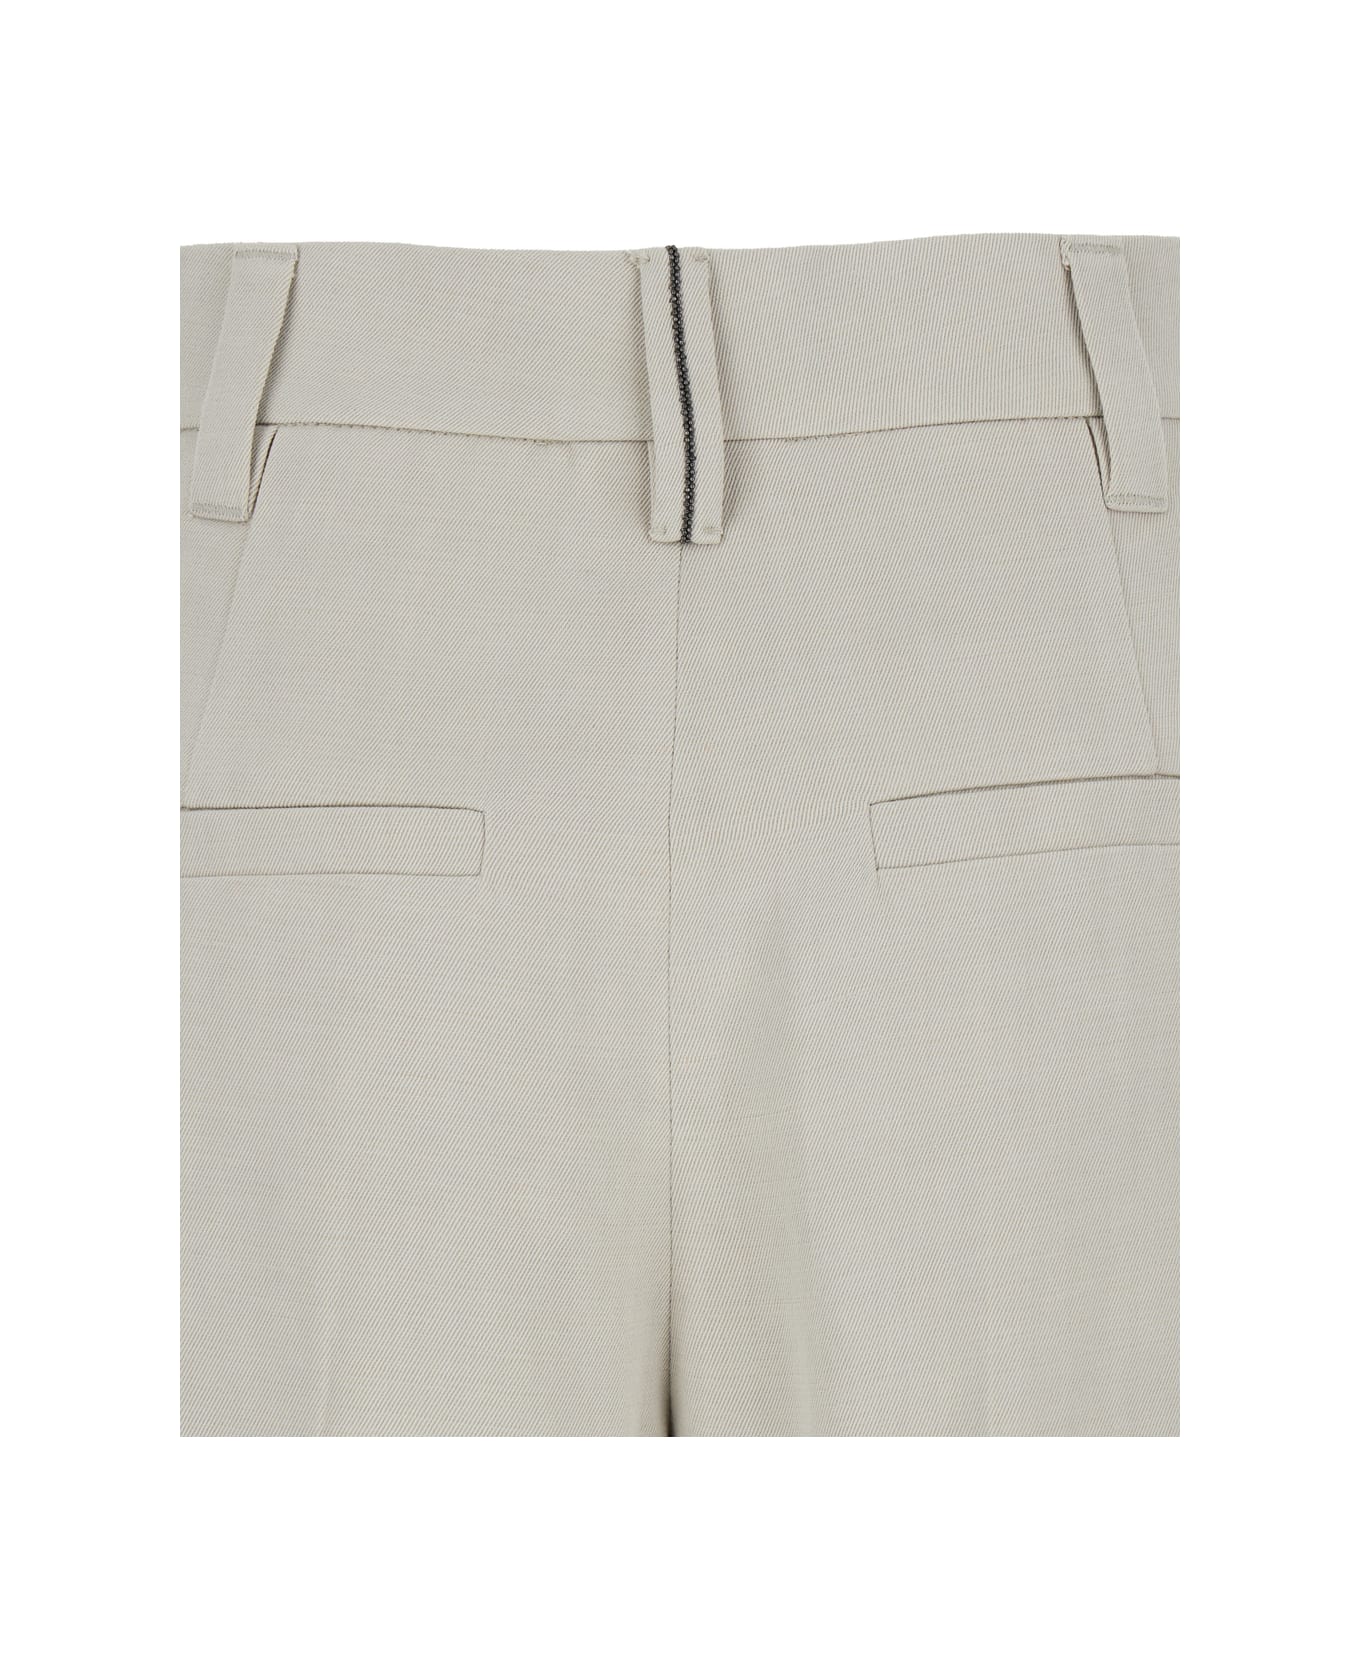 Brunello Cucinelli White Monili Embellished Trousers In Linen Blend Woman - White ボトムス